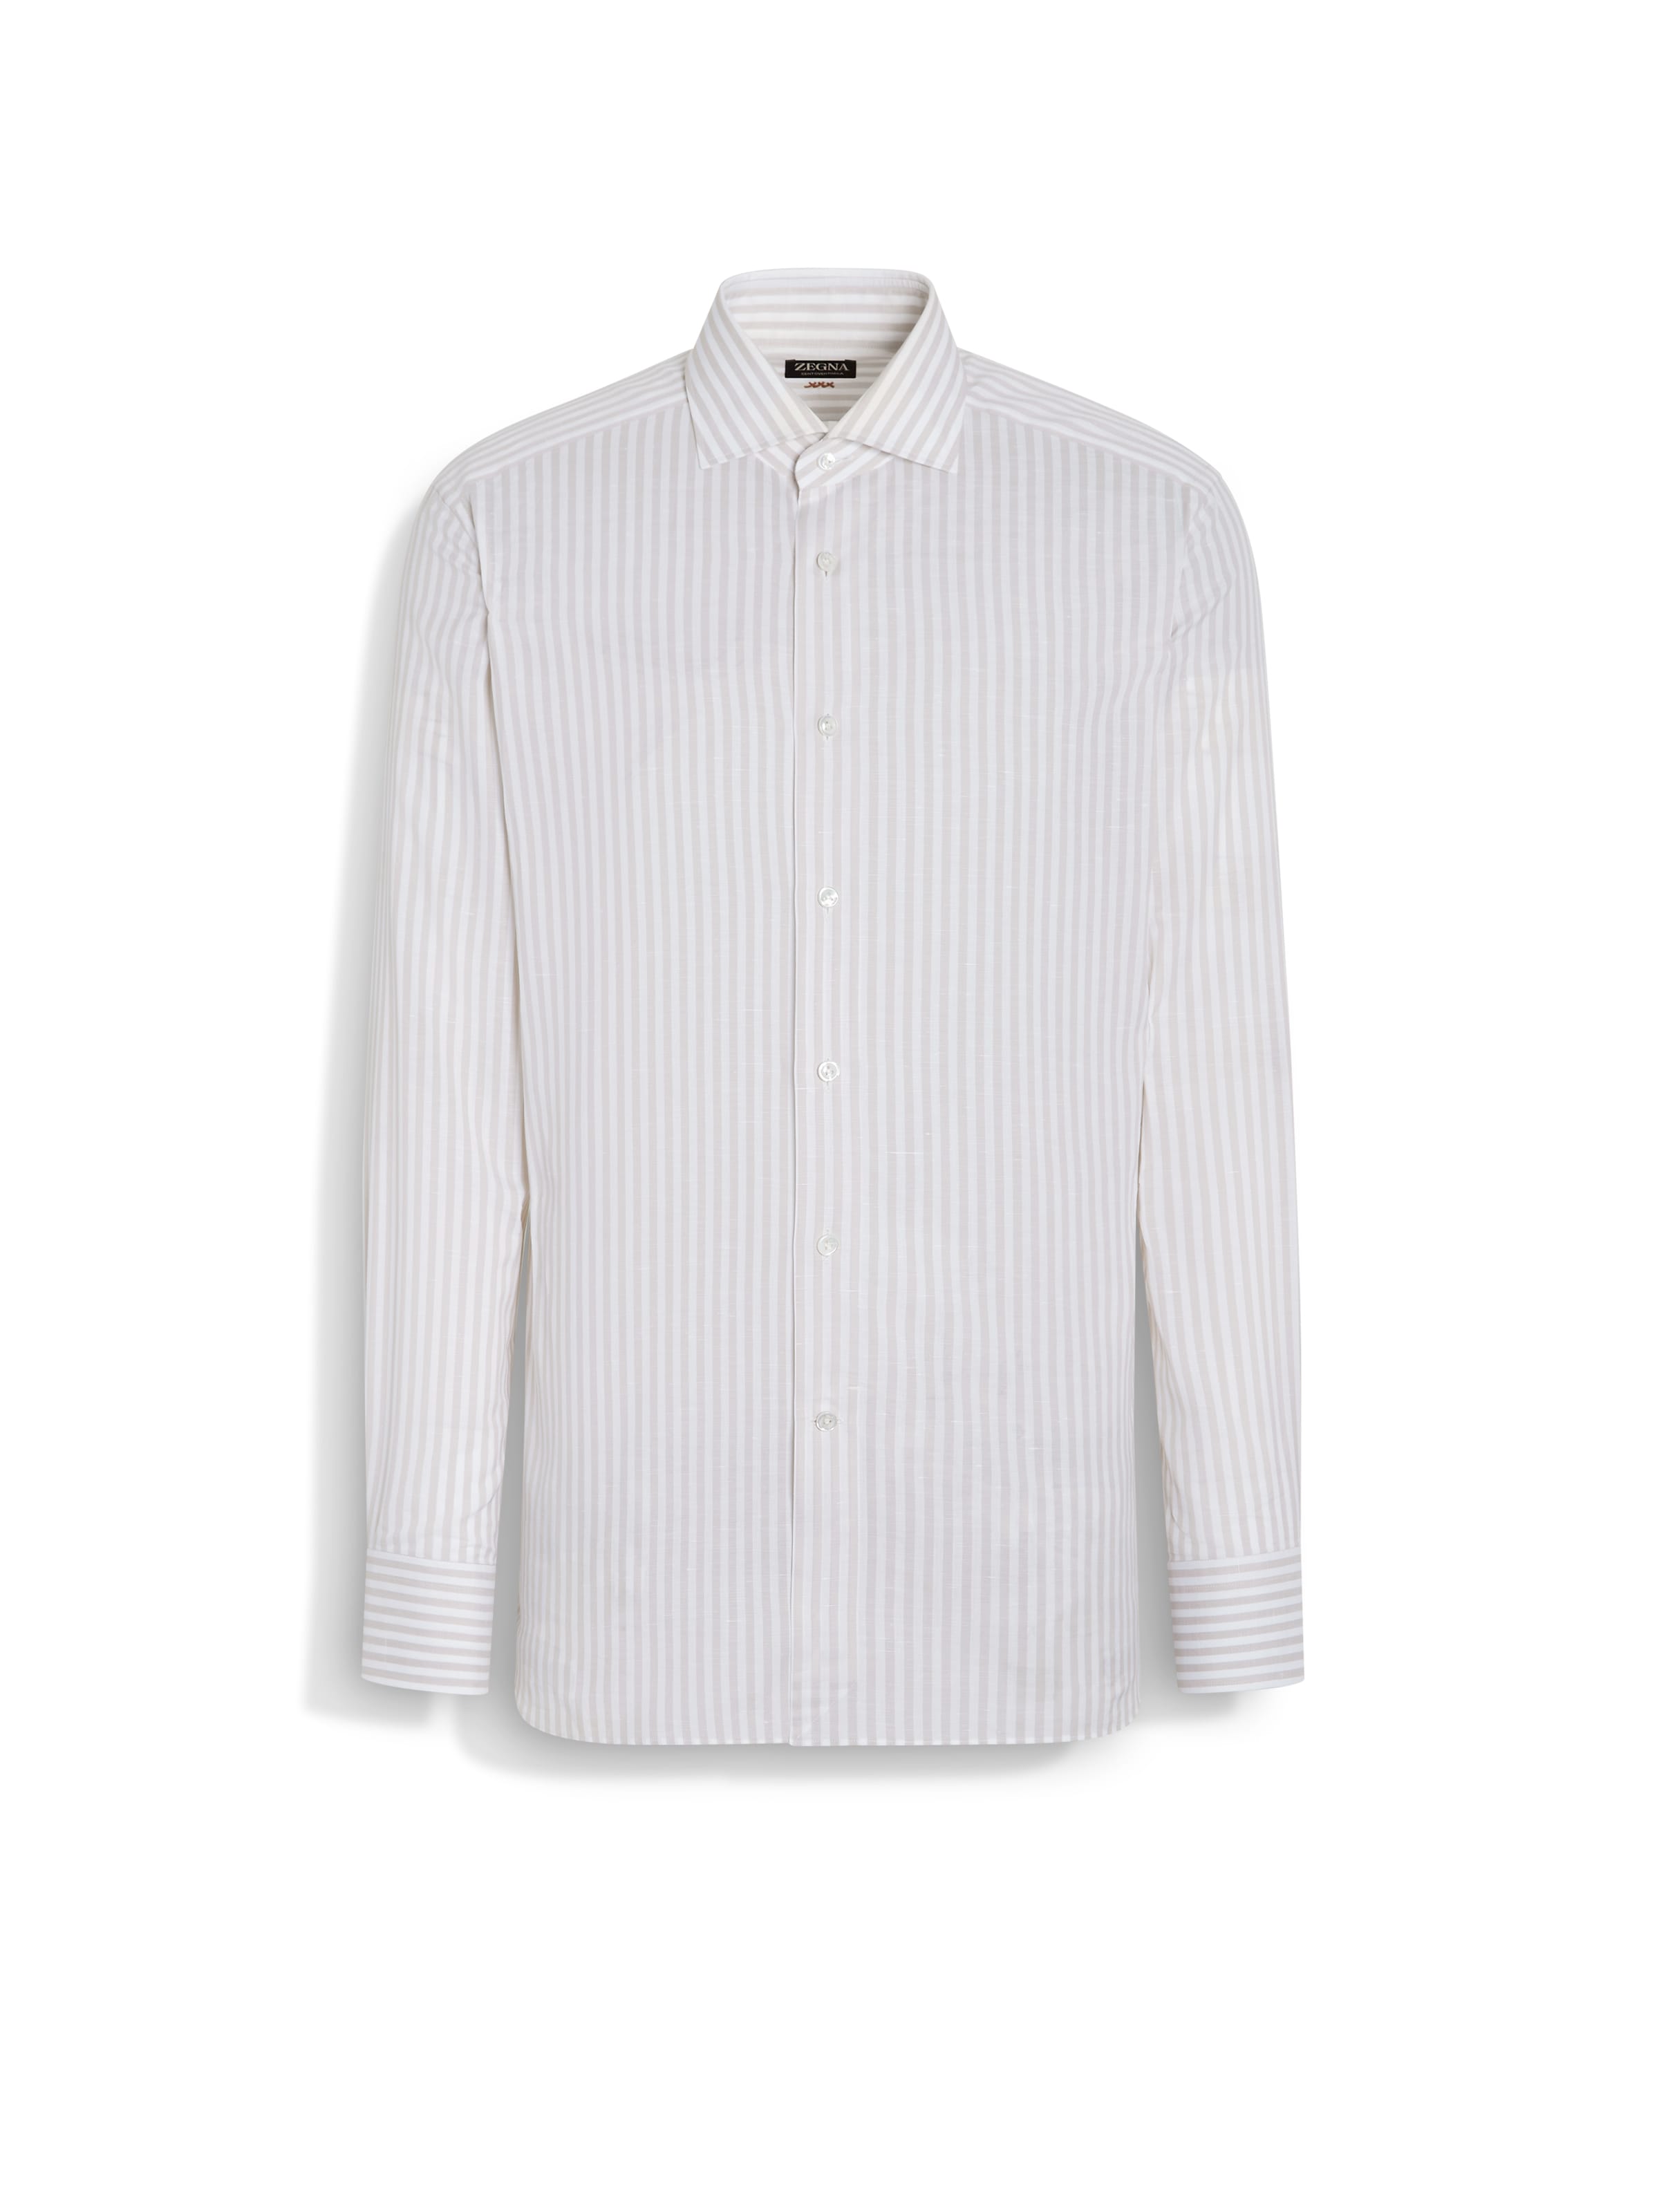 Zegna Light Beige And White Striped Centoventimila Cotton And Linen Shirt In Light Beige White